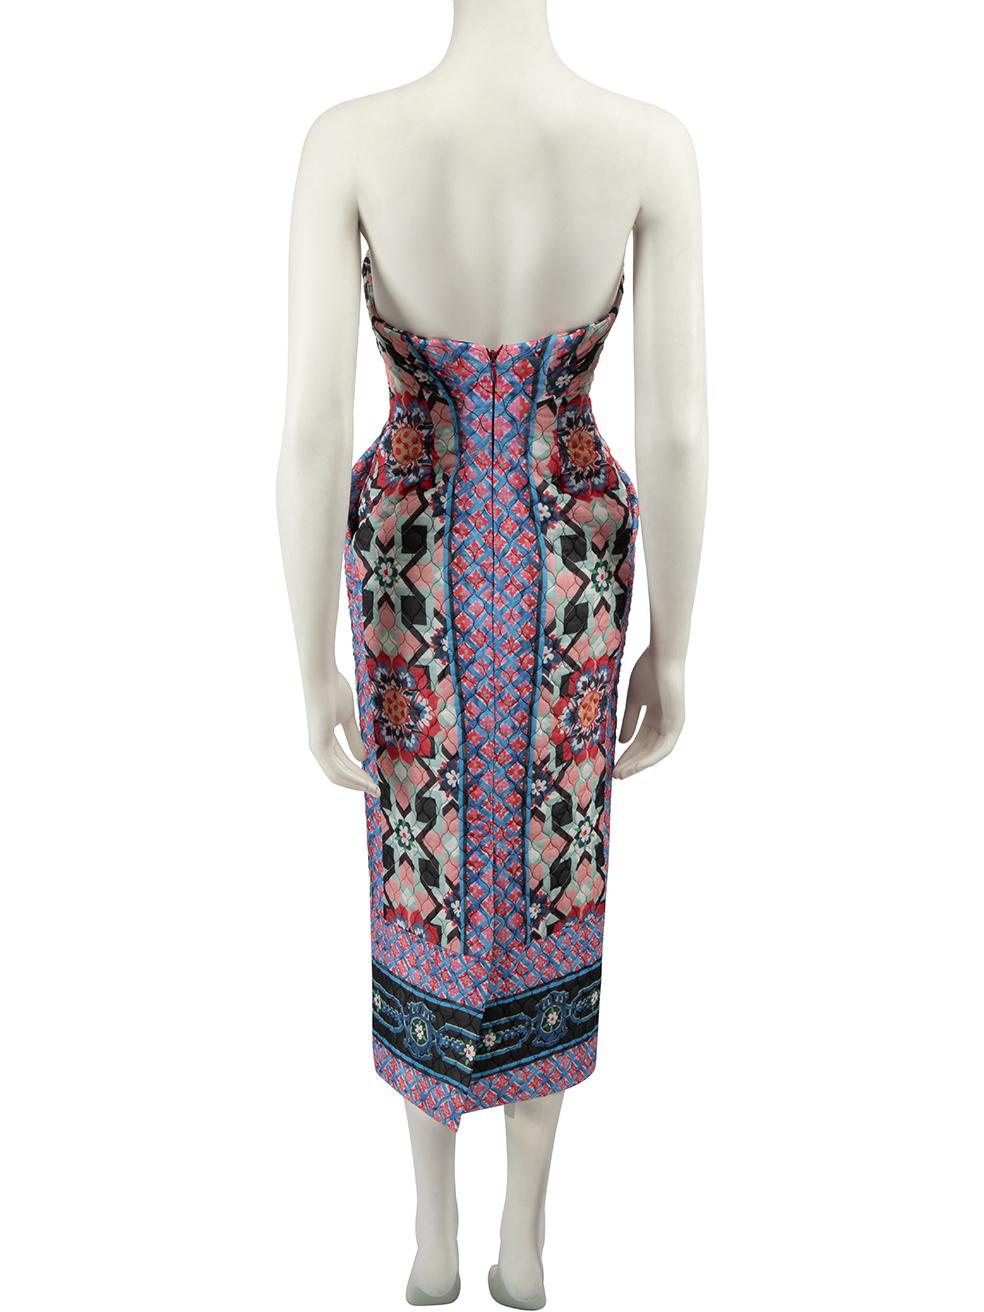 Women's Temperley London Quilted Pattern Strapless Dress Size XS For Sale